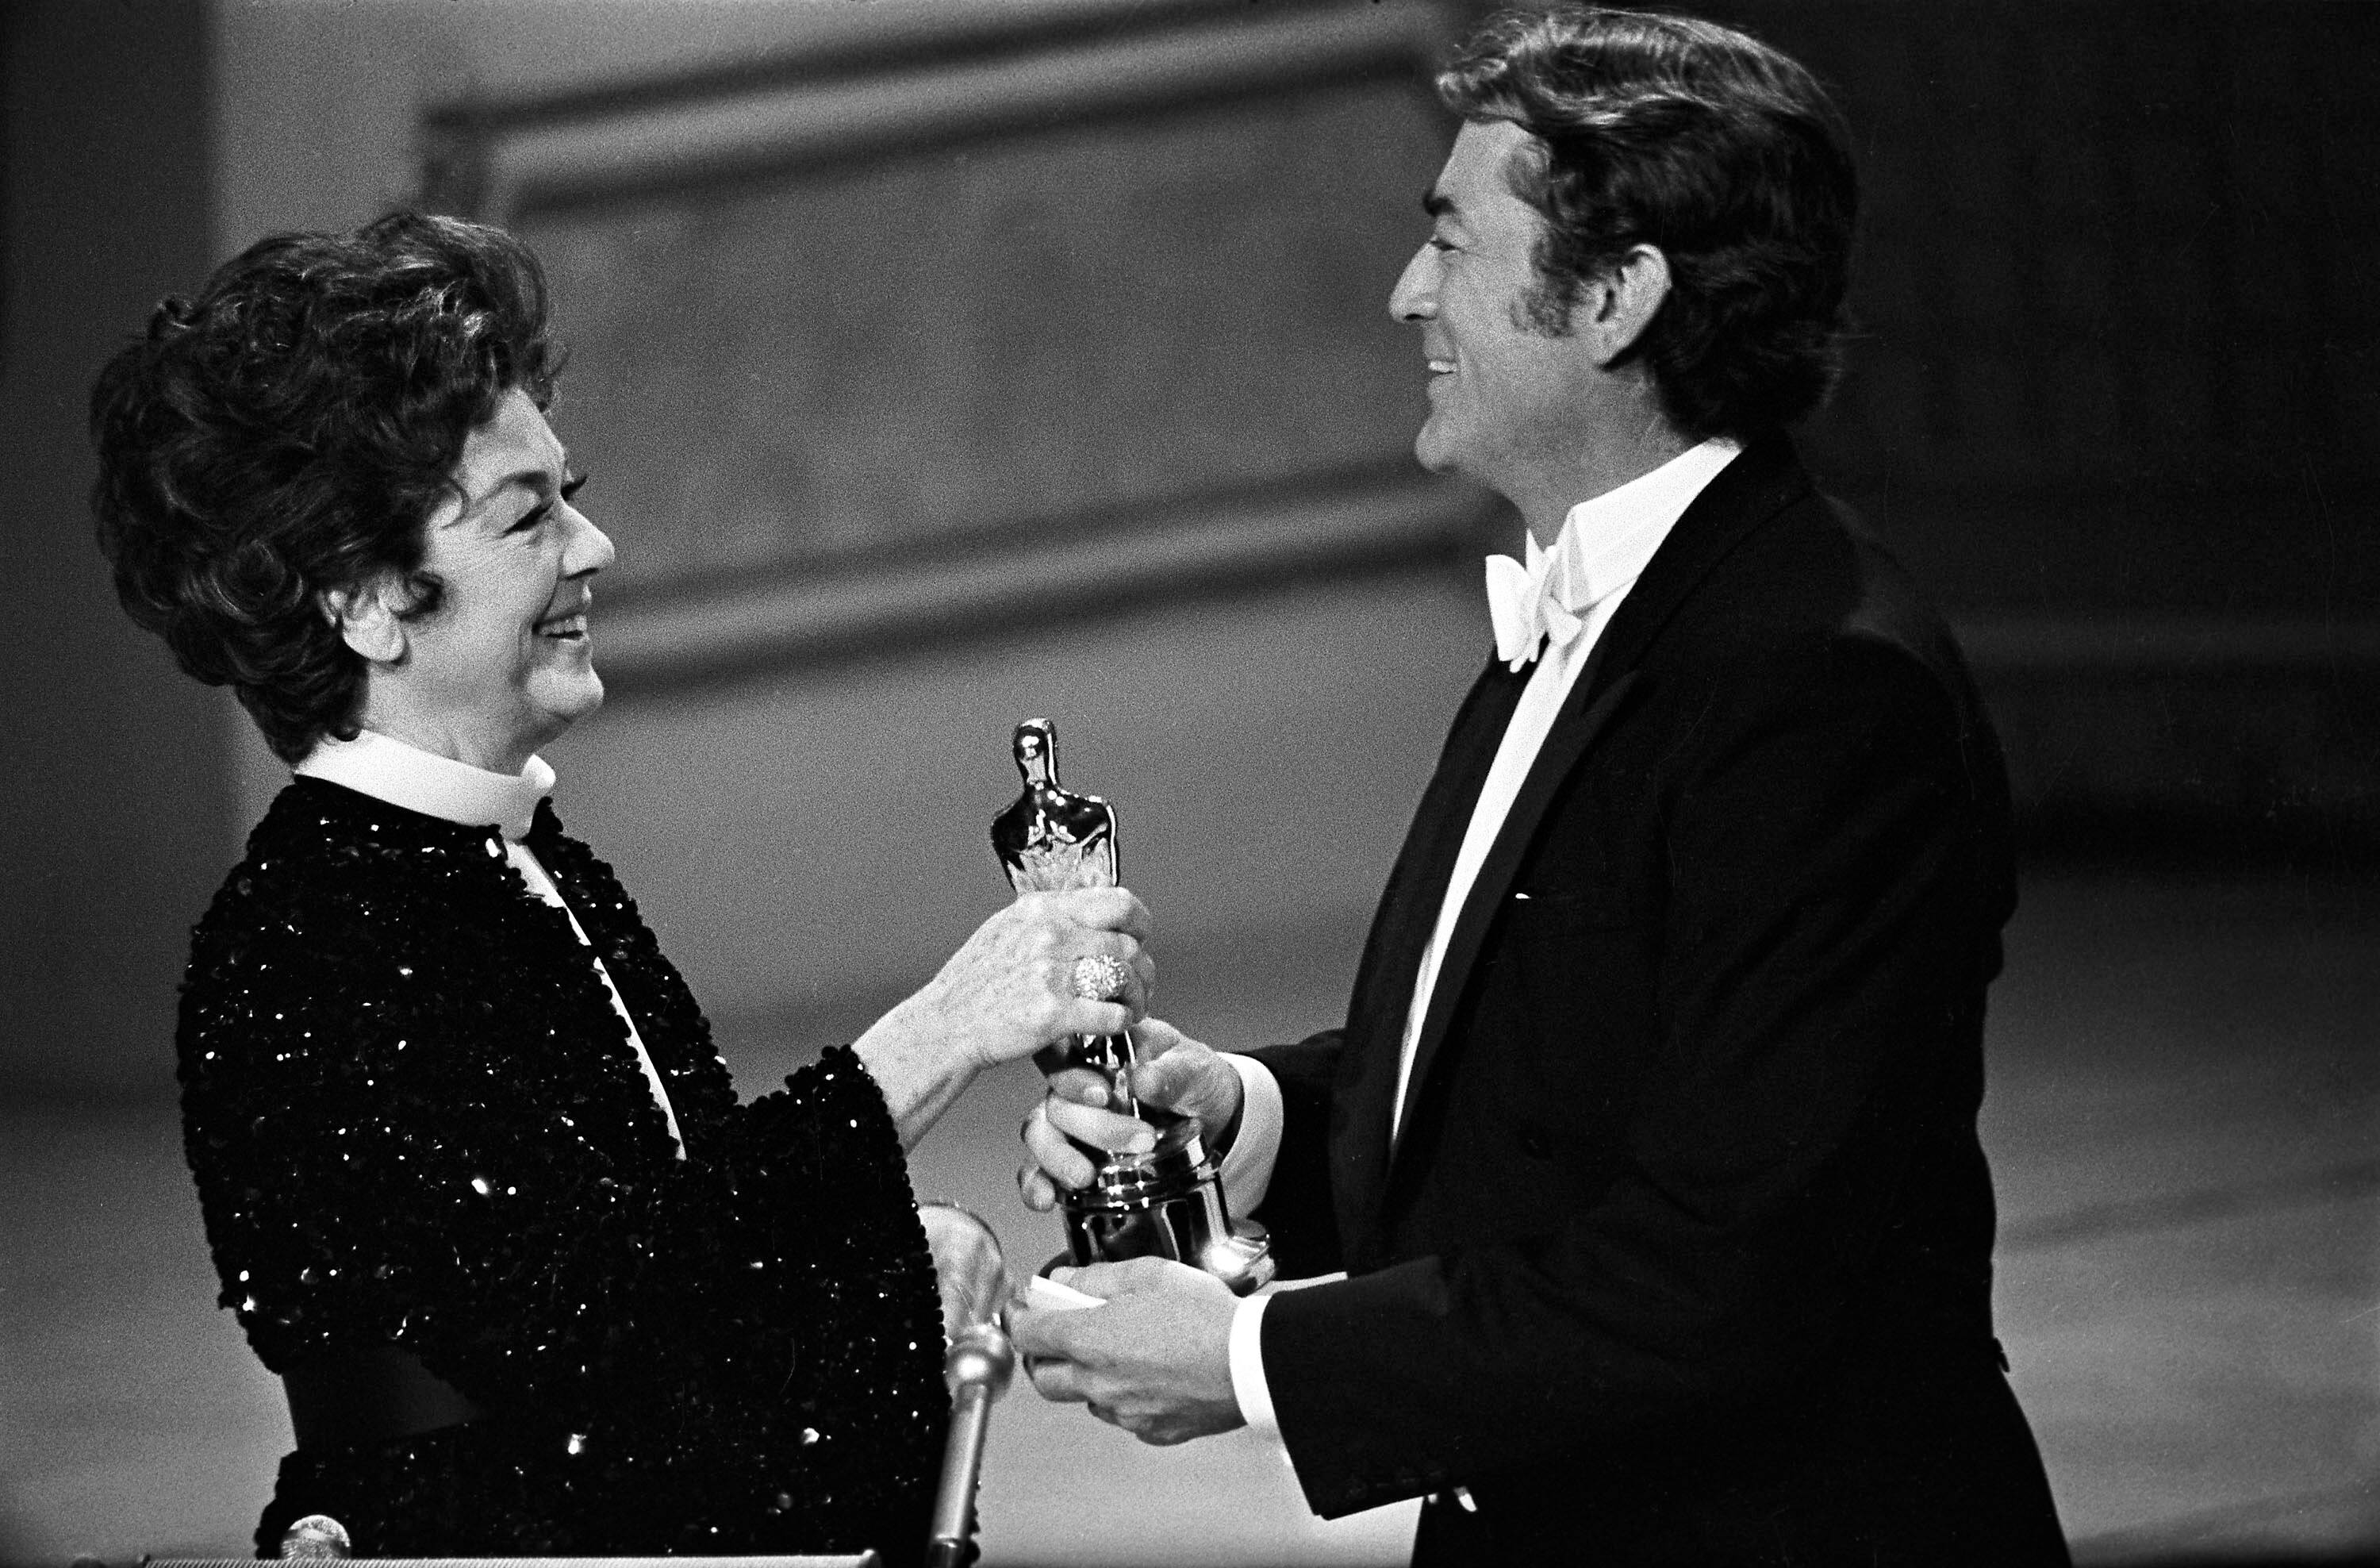 1968 | Oscars.org | Academy of Motion Picture Arts and Sciences3000 x 1976